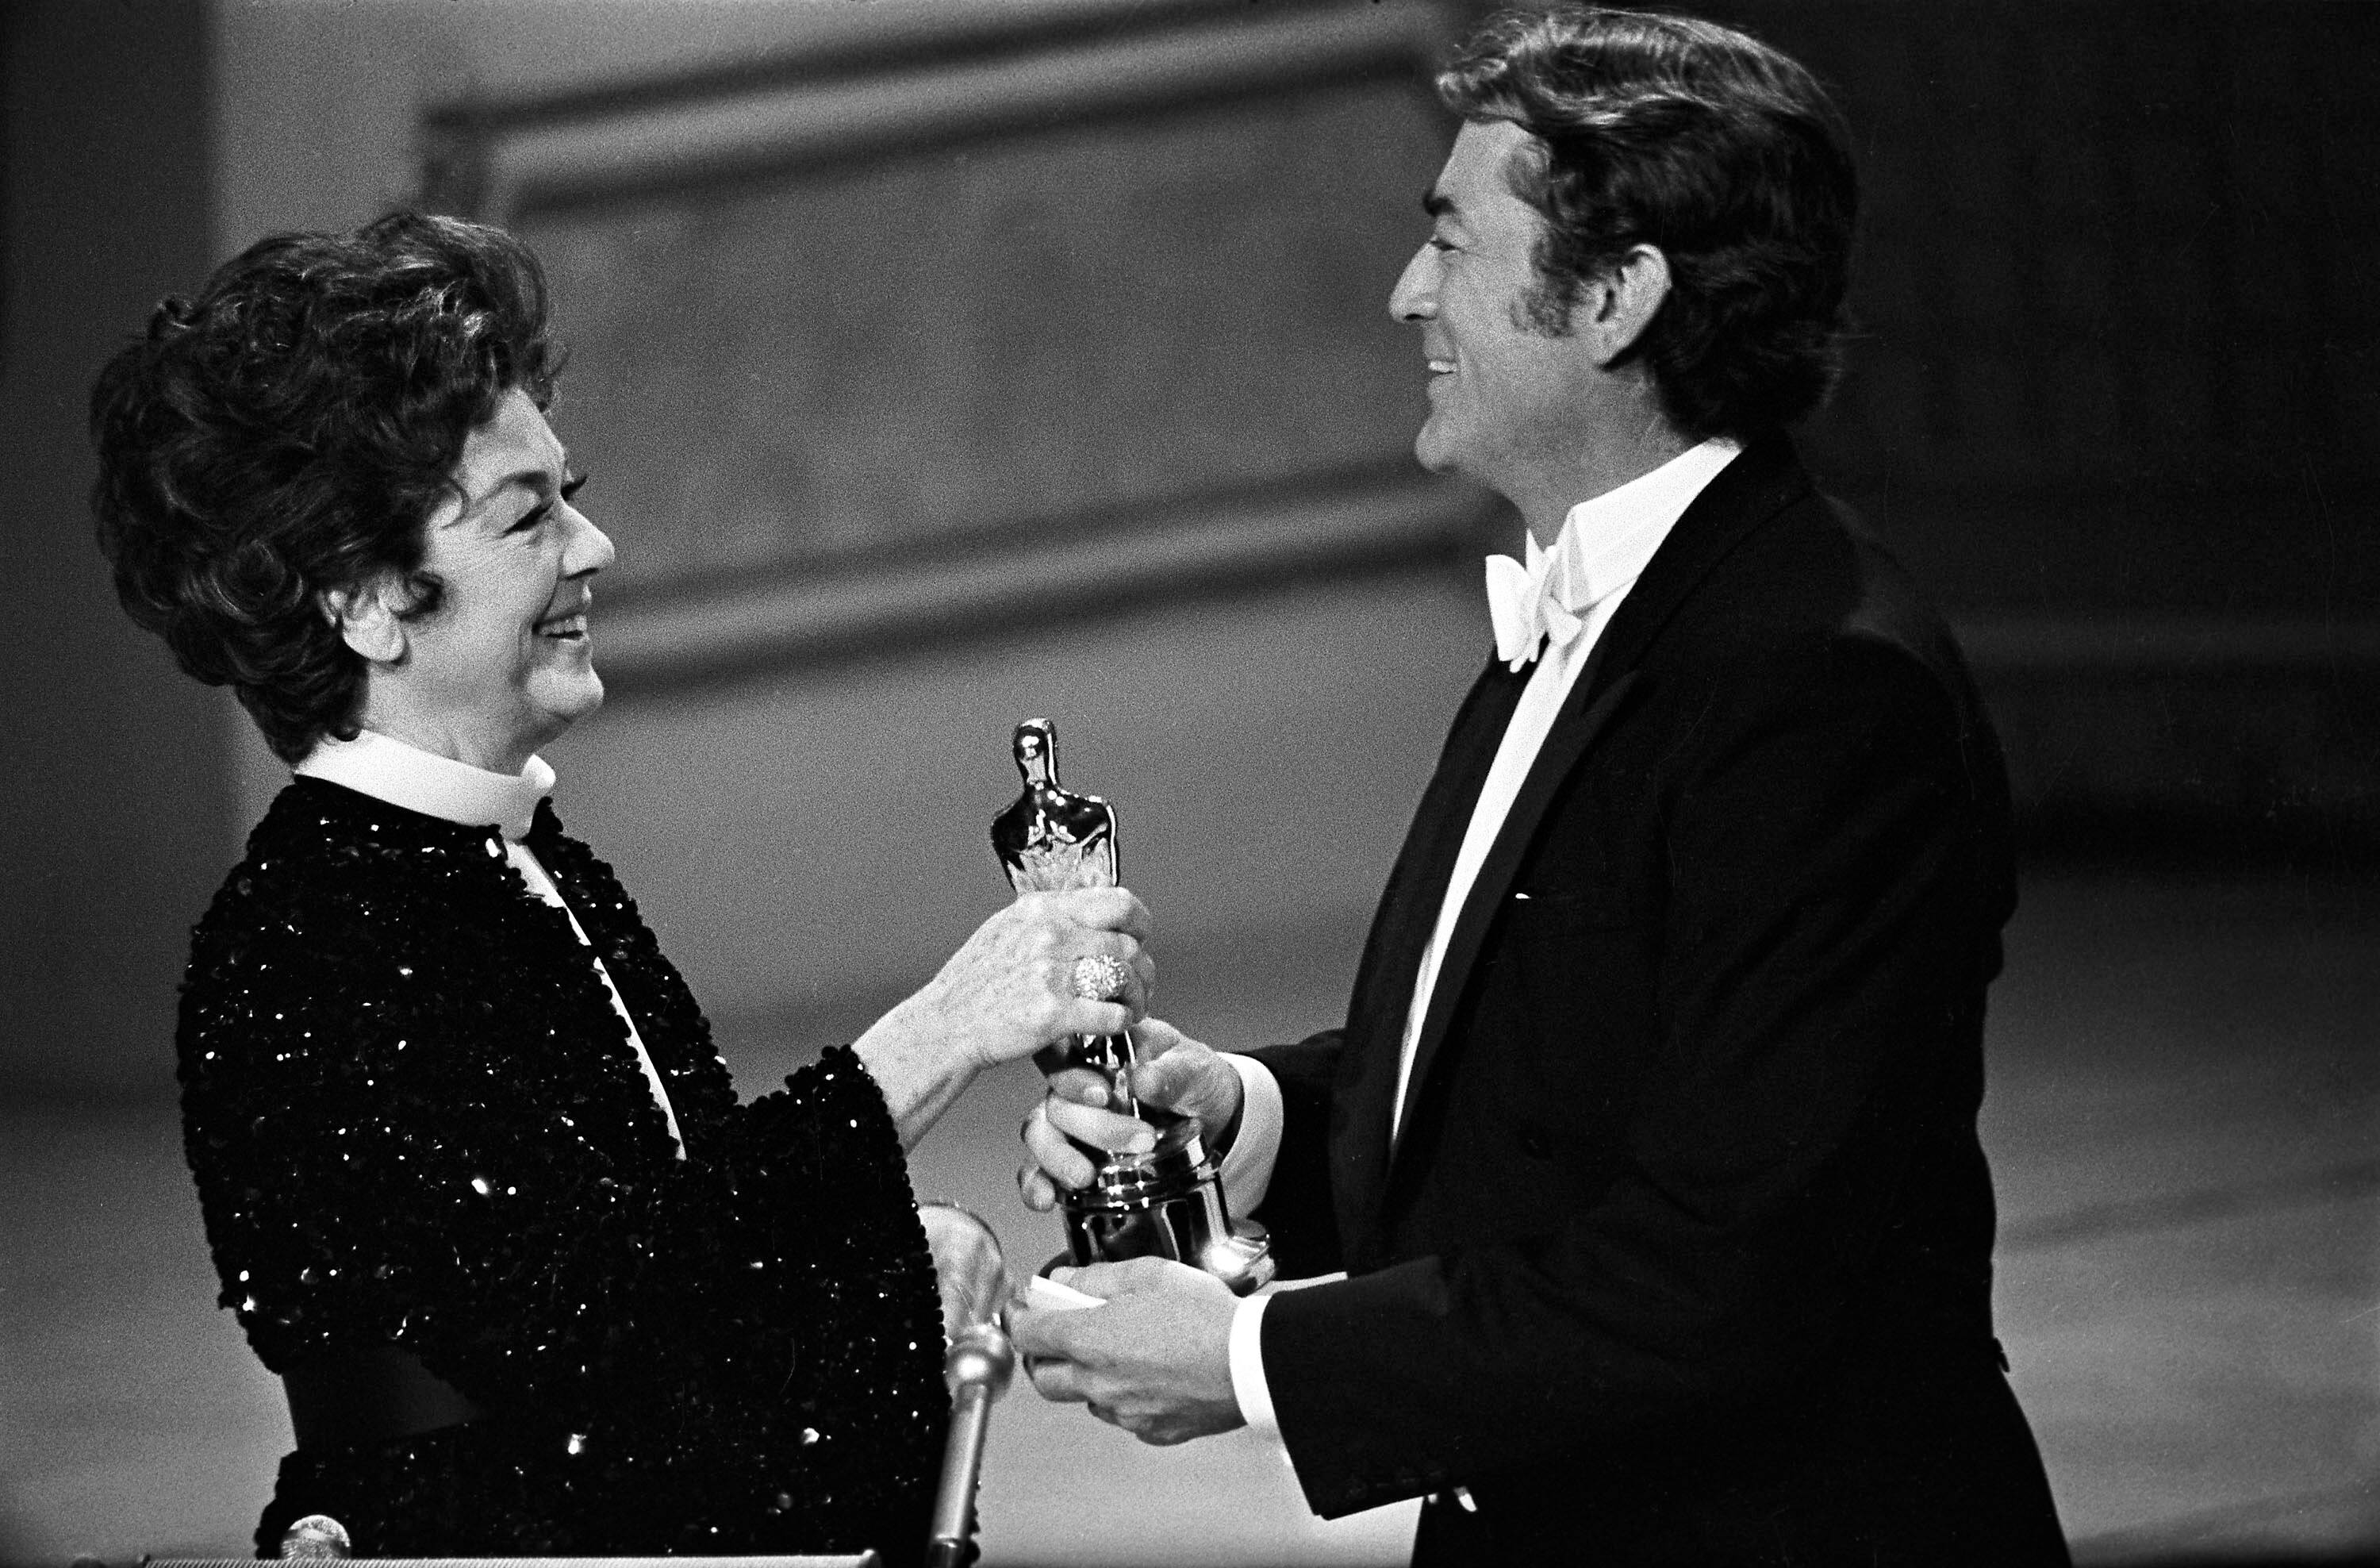 1968 | Oscars.org | Academy of Motion Picture Arts and Sciences3000 x 1976